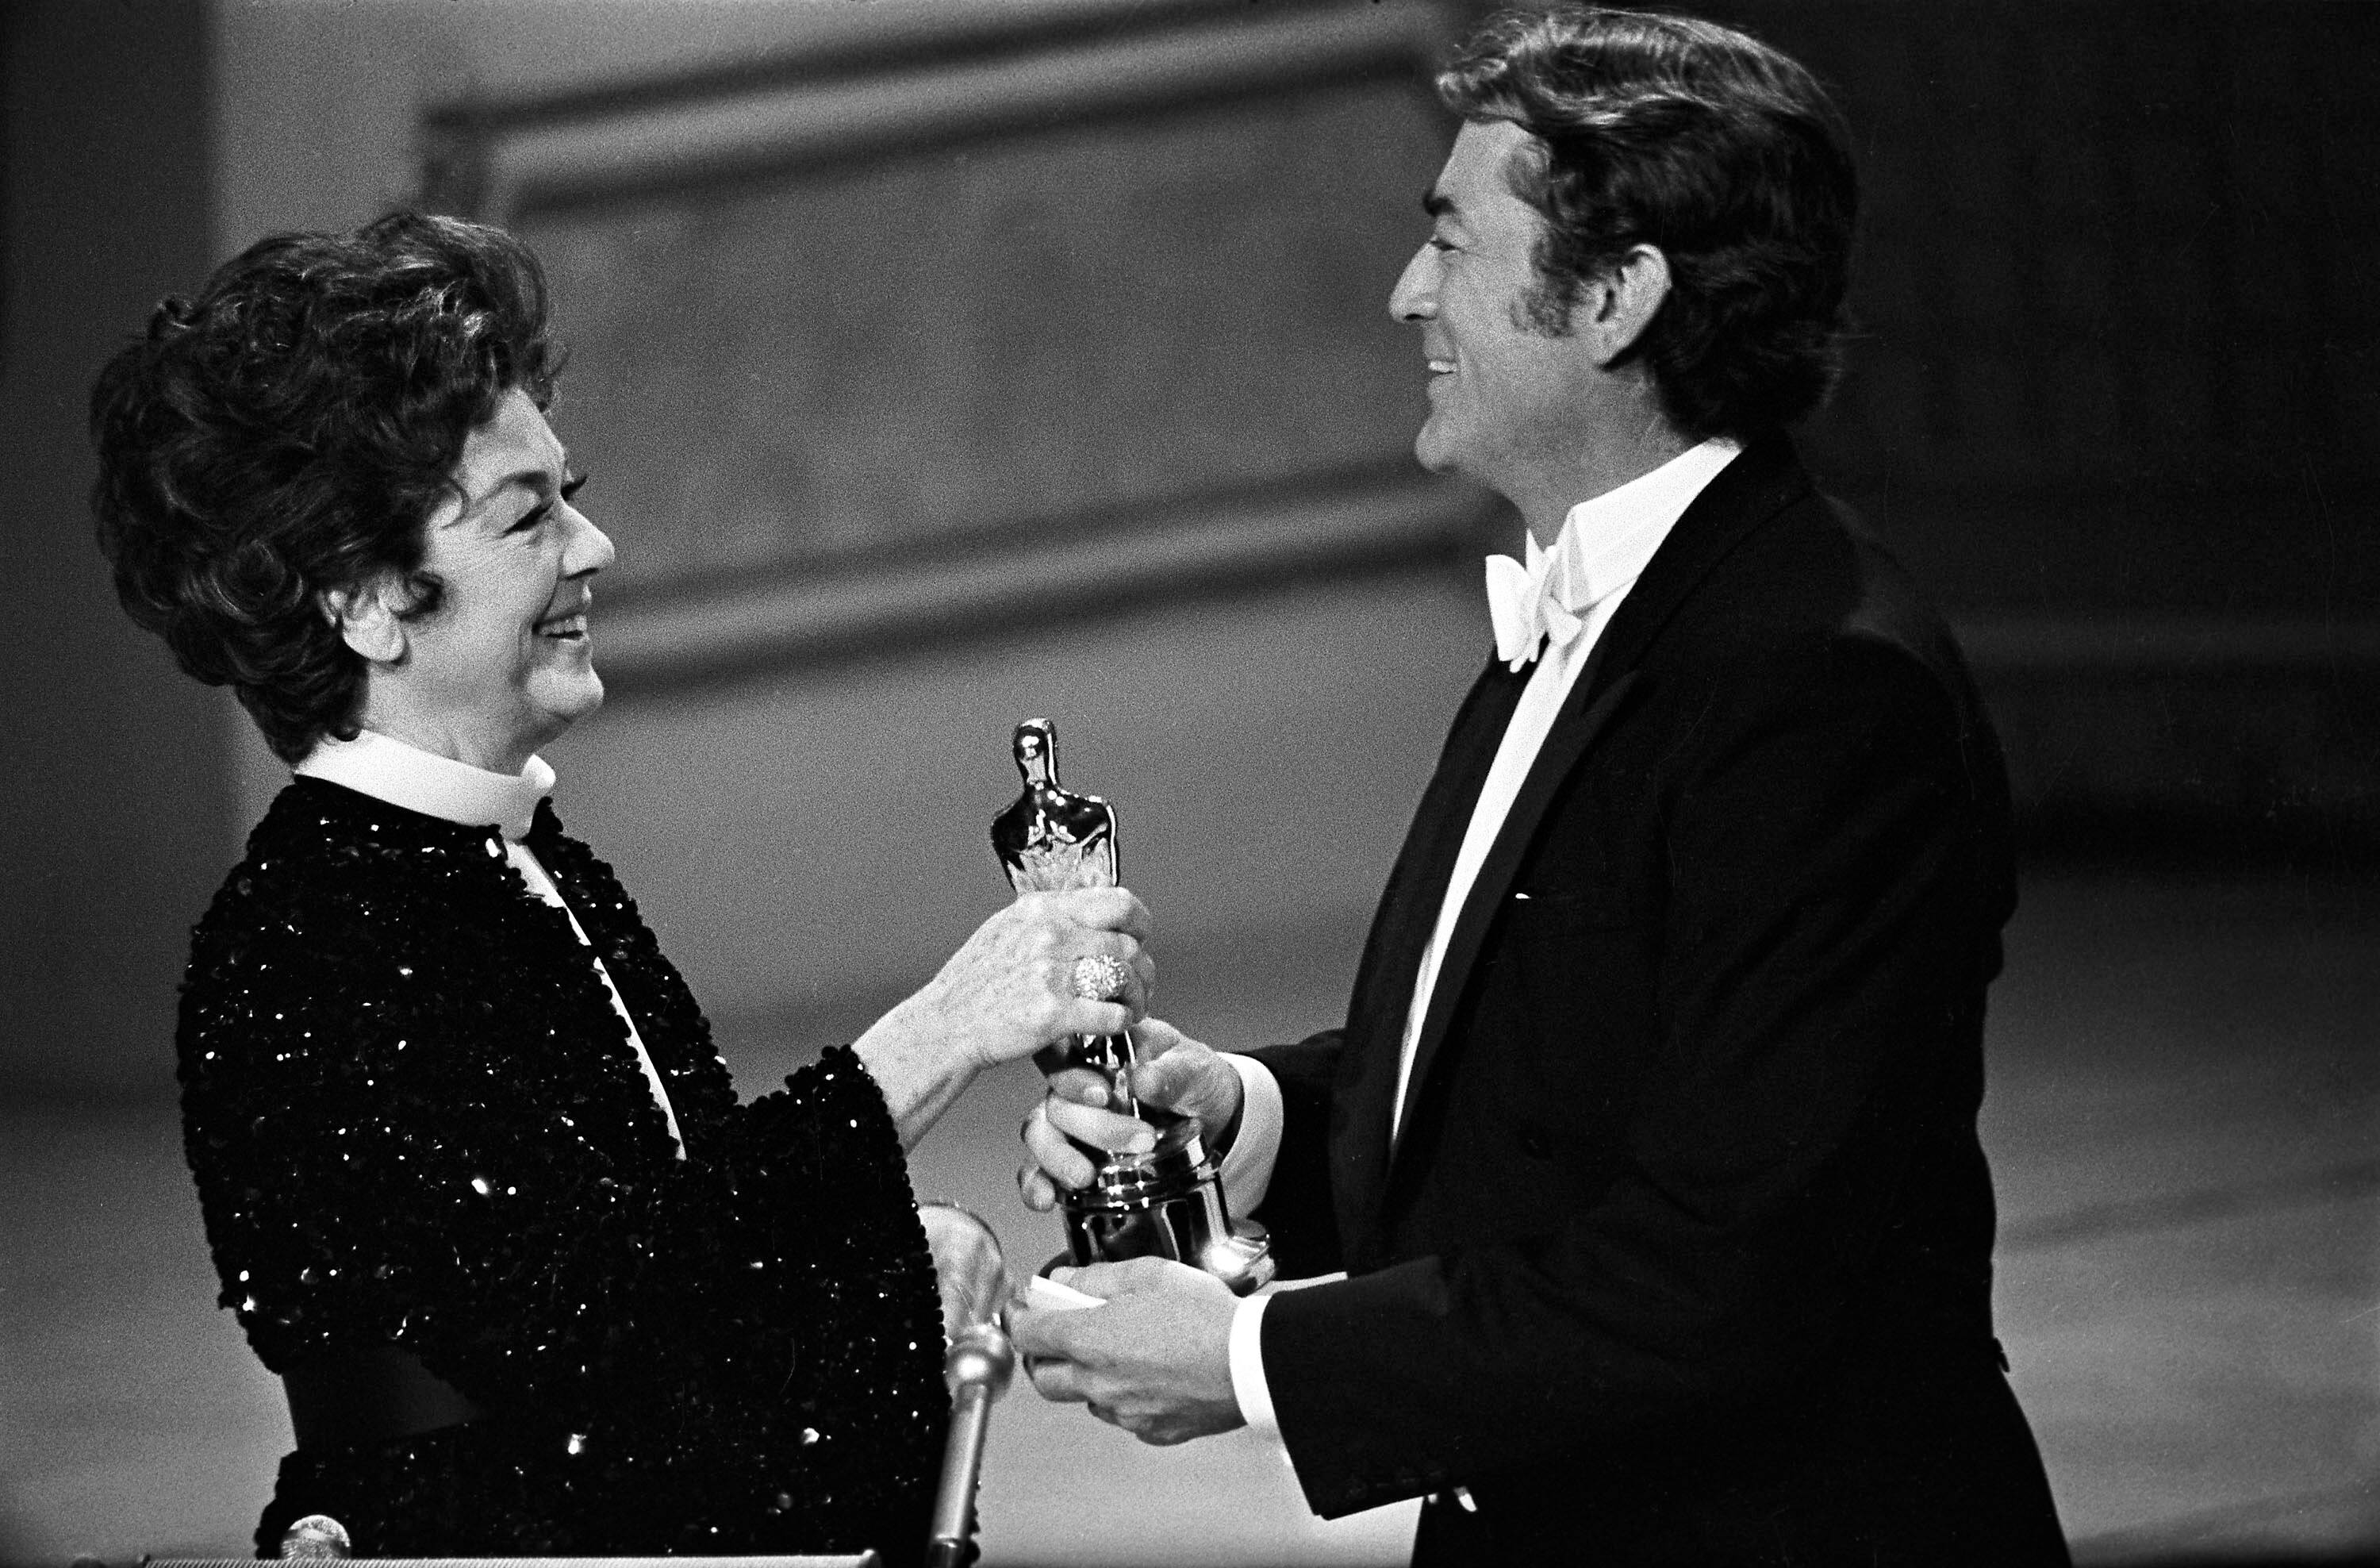 1968 | Oscars.org | Academy of Motion Picture Arts and Sciences3000 x 1976